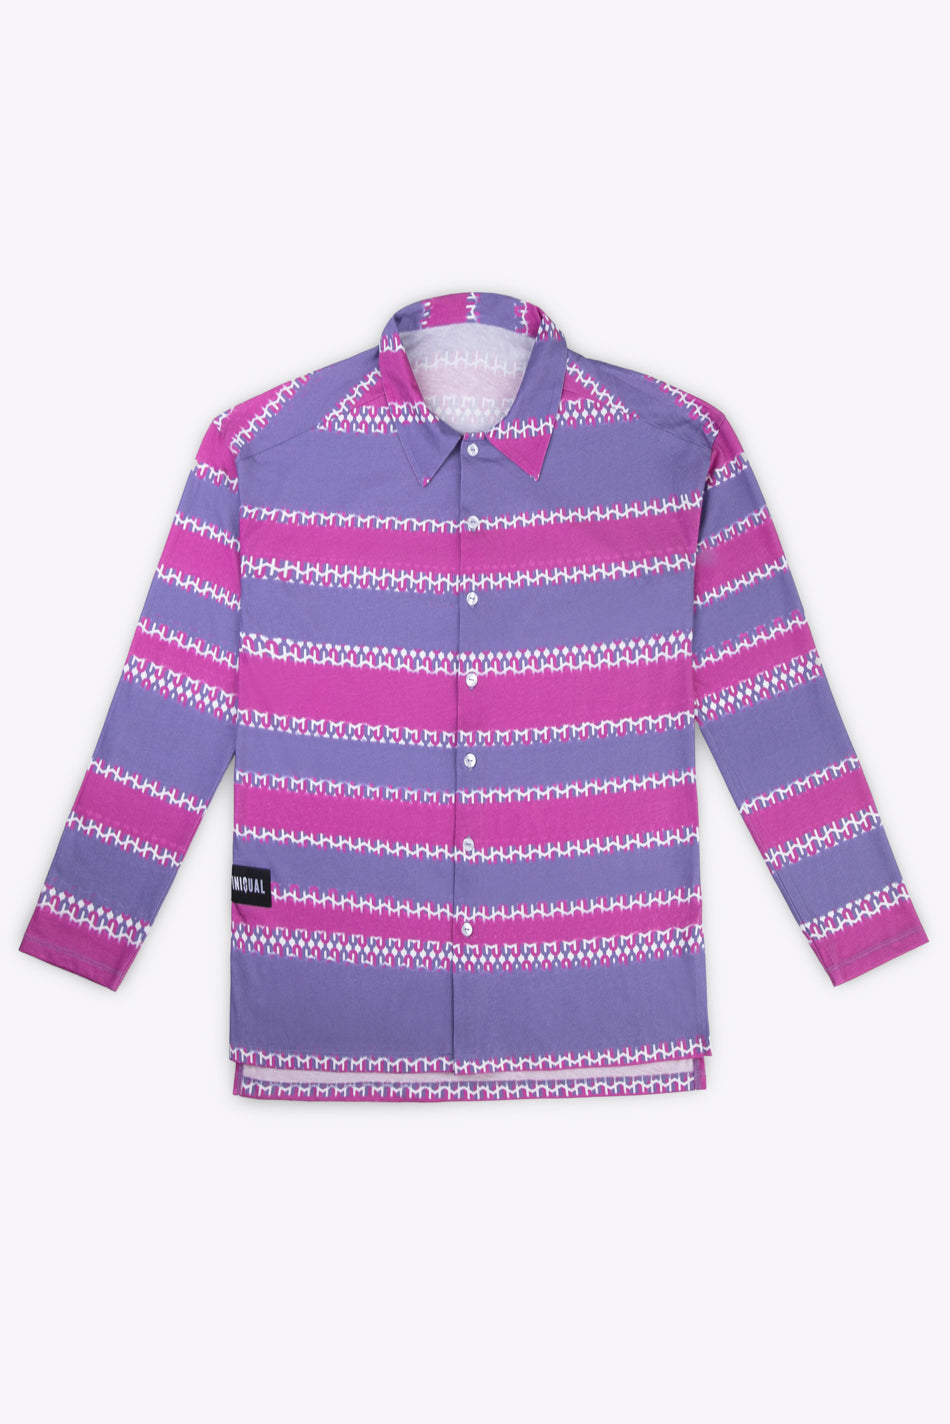 Unisex Pink and Blue lounge Printed Cotton Shirt